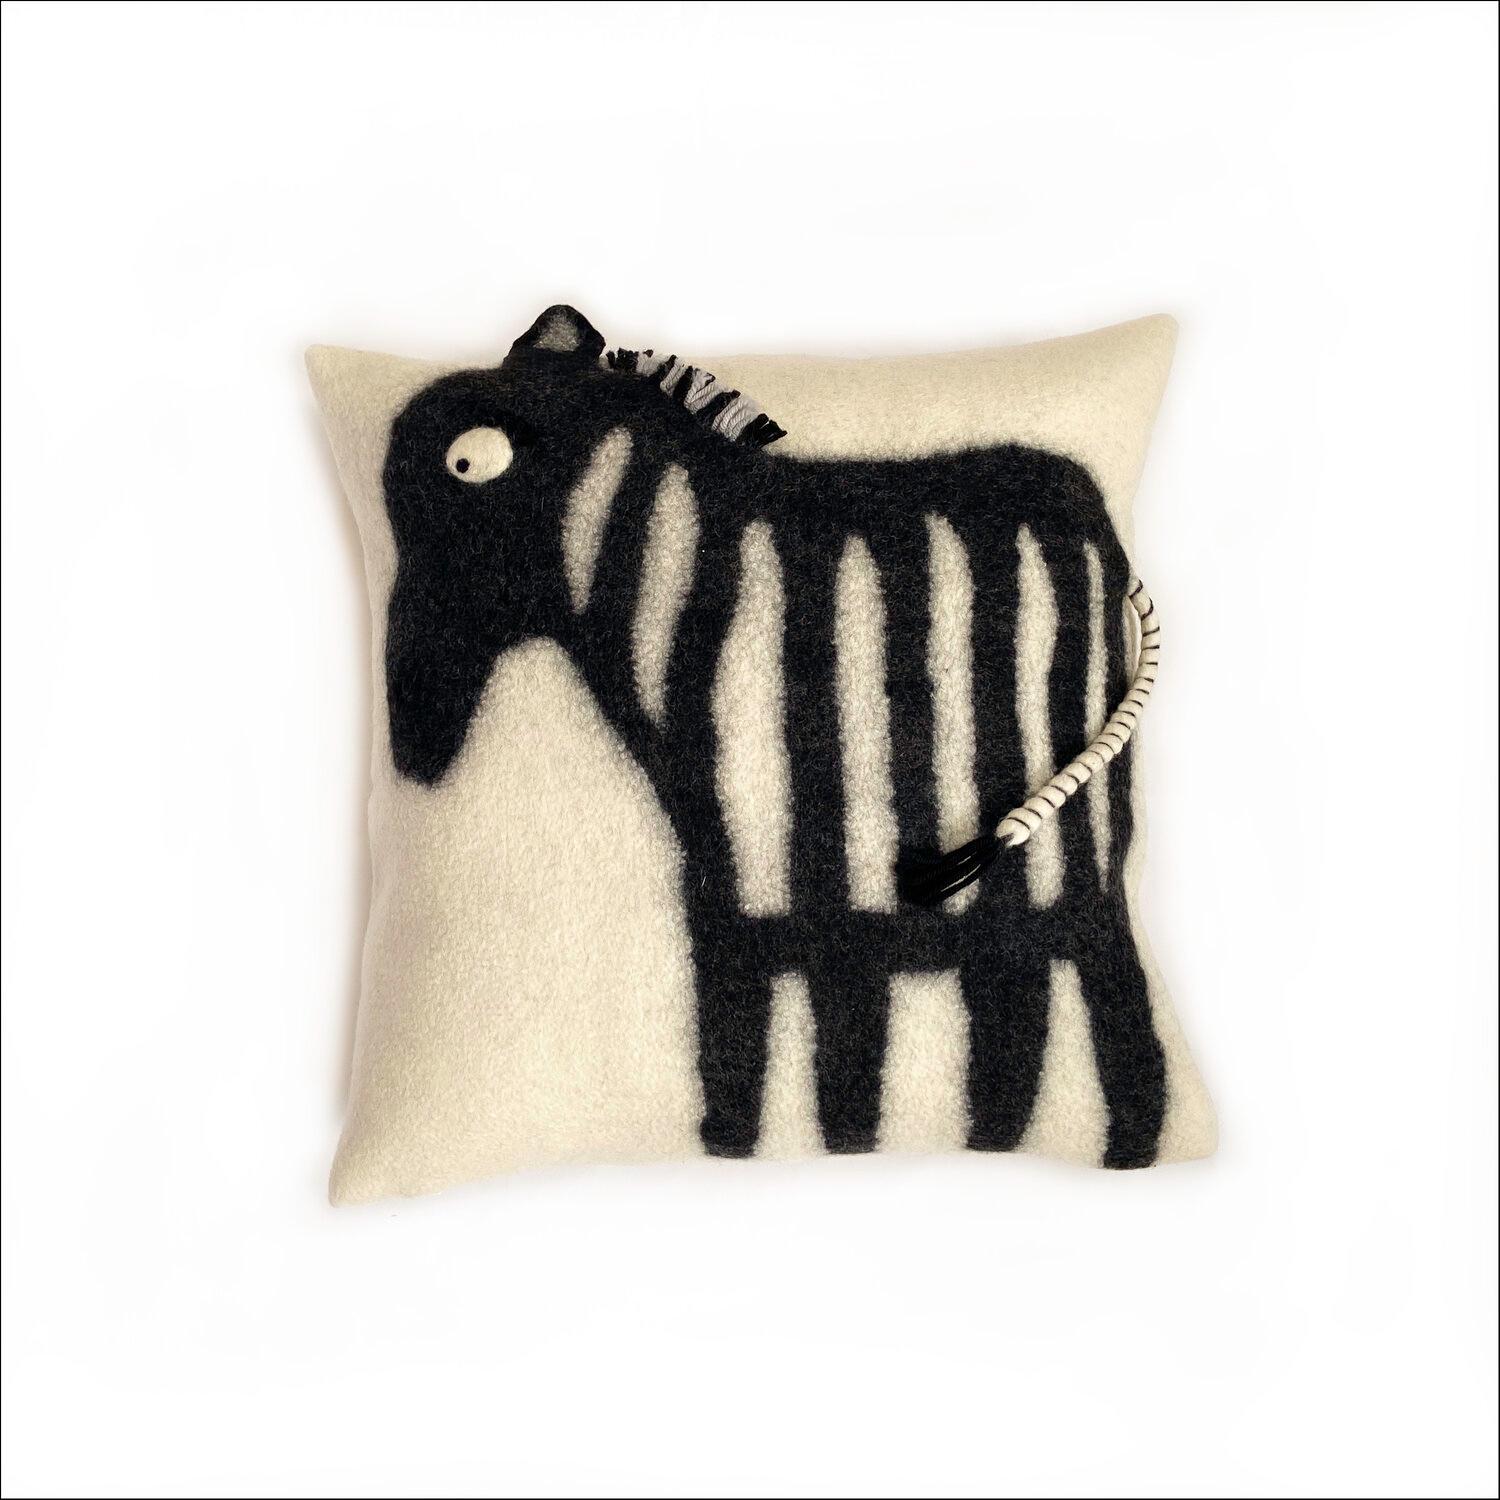 Meet Bella the Bumblebee.

A contemporary take on the wool-felting process, these individually handmade wool pillows from the studio of Chic Fusion, a female, South-African designer, are a whimsical and an eye-catching accessory to any space. The